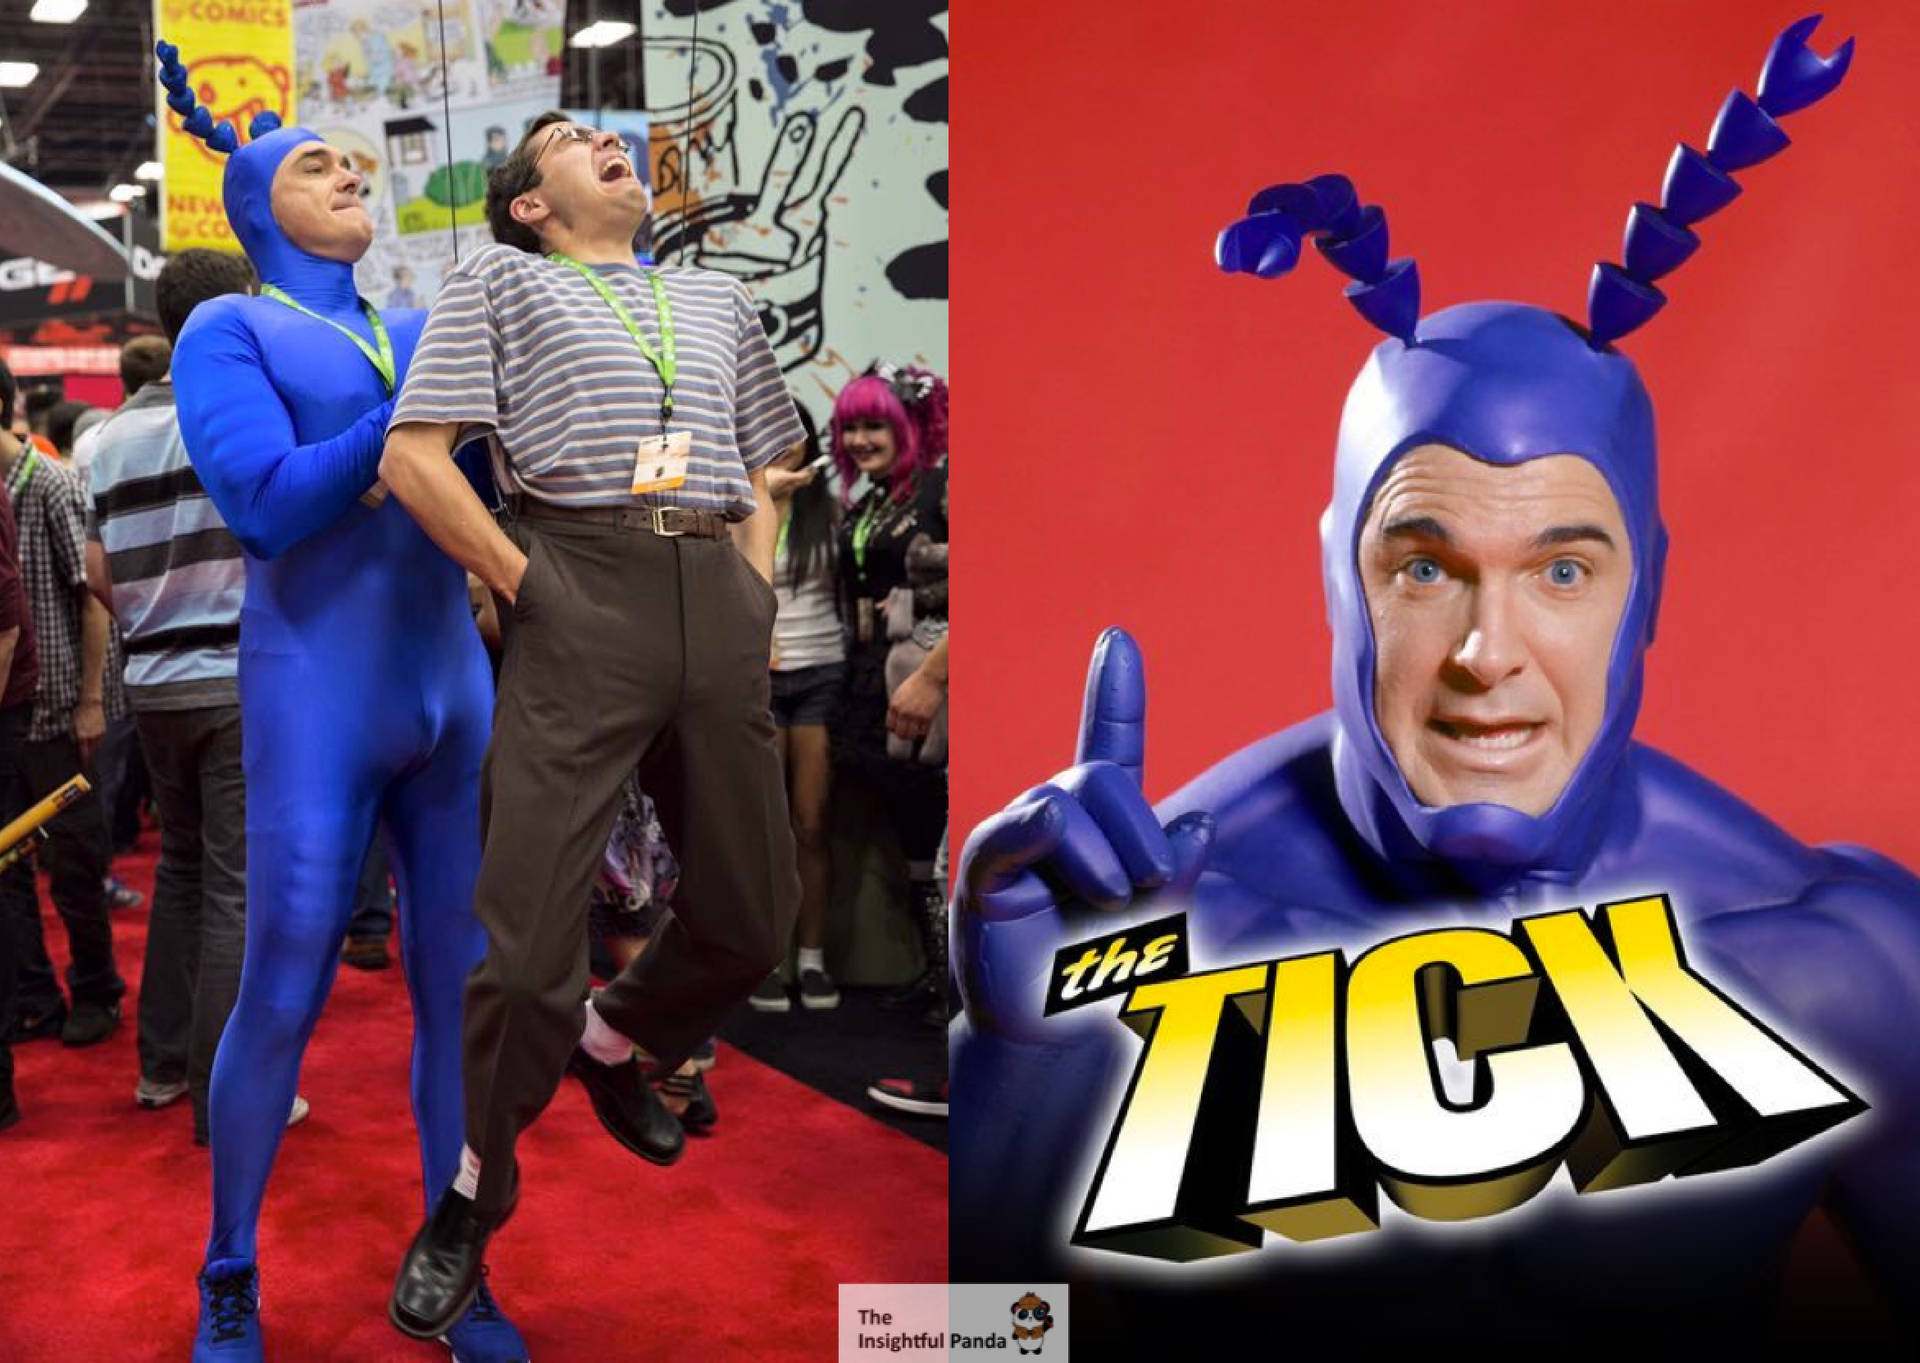 An epic adventure with Ted and The Tick Wallpaper